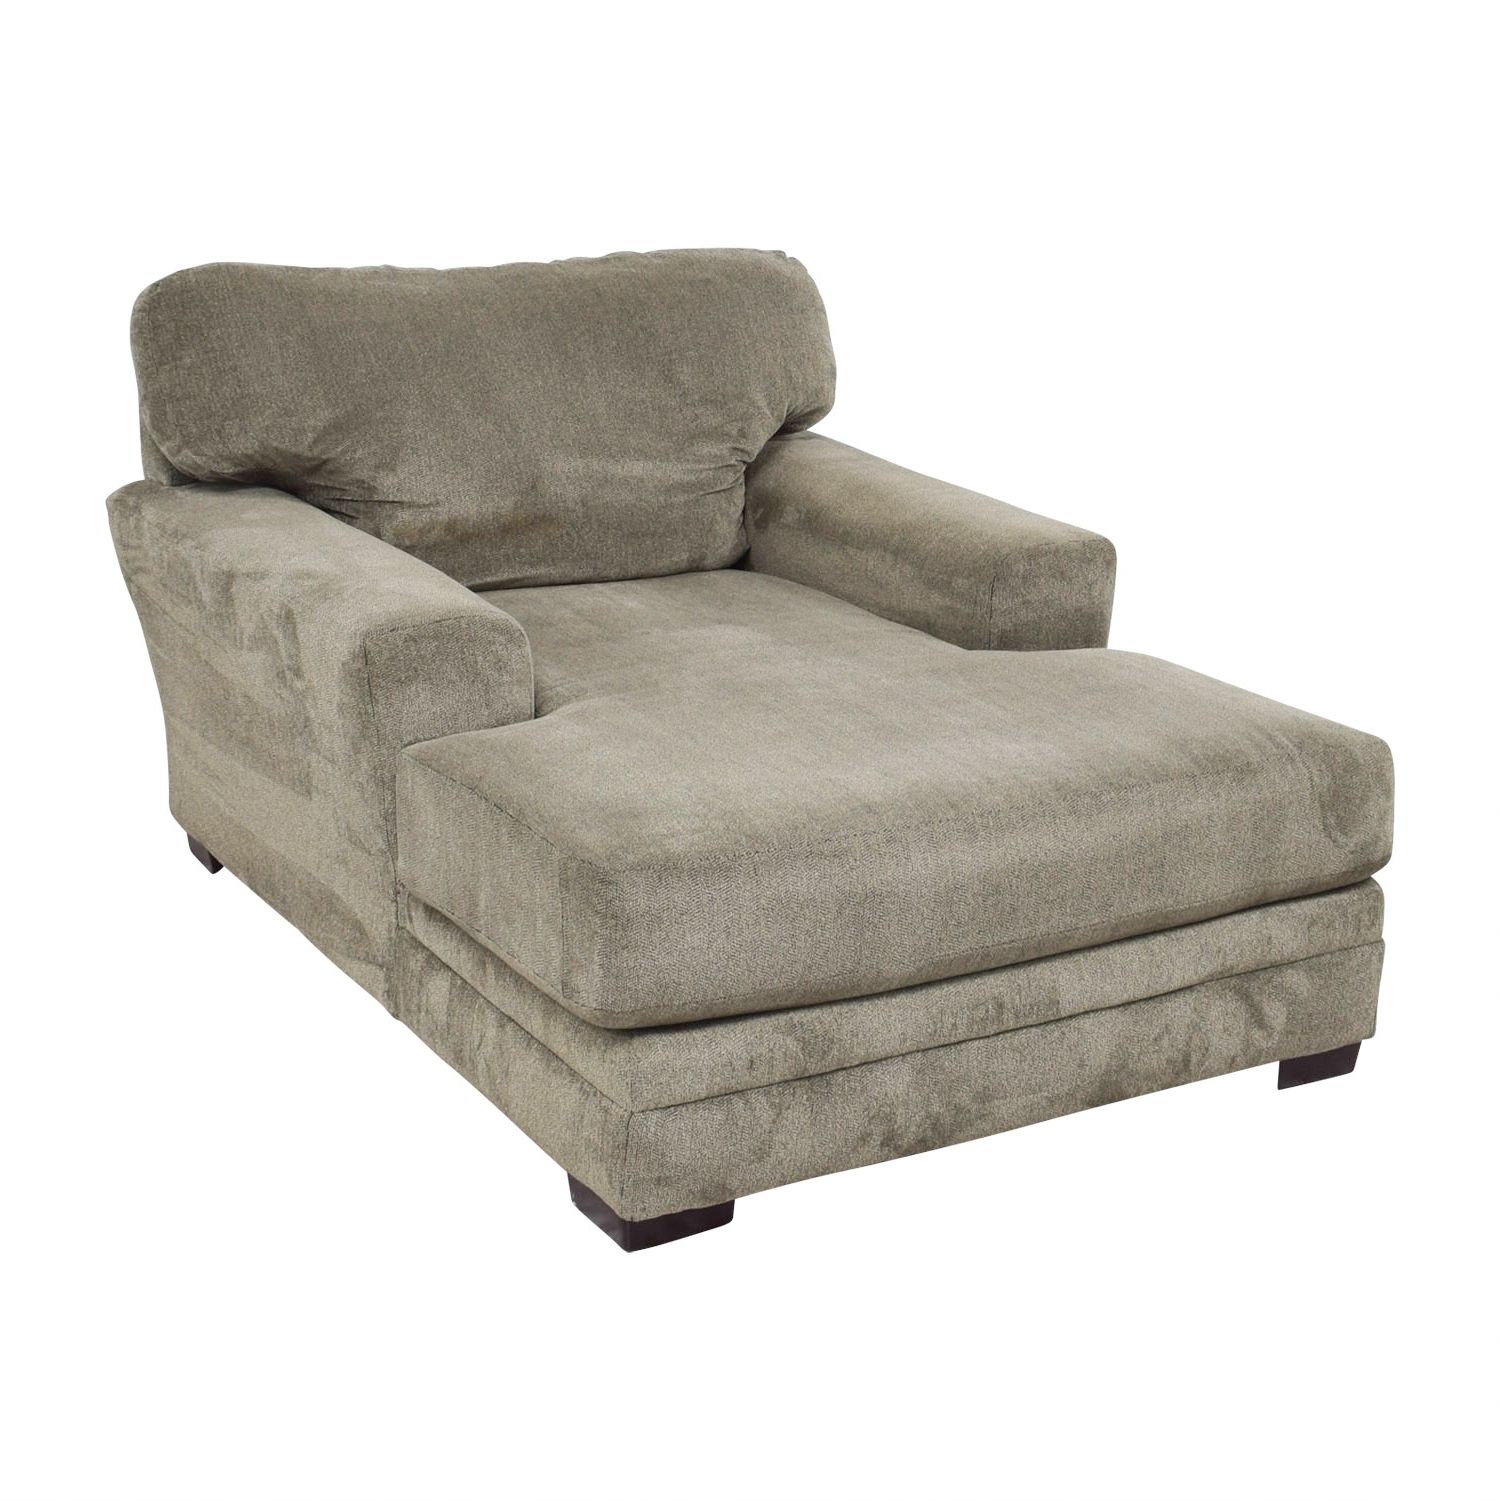 [%81% Off – Bob's Furniture Bob's Furniture Grey Chaise Lounge / Sofas Regarding Well Liked Grey Chaises|grey Chaises For Newest 81% Off – Bob's Furniture Bob's Furniture Grey Chaise Lounge / Sofas|popular Grey Chaises With 81% Off – Bob's Furniture Bob's Furniture Grey Chaise Lounge / Sofas|best And Newest 81% Off – Bob's Furniture Bob's Furniture Grey Chaise Lounge / Sofas With Grey Chaises%] (Photo 5 of 15)